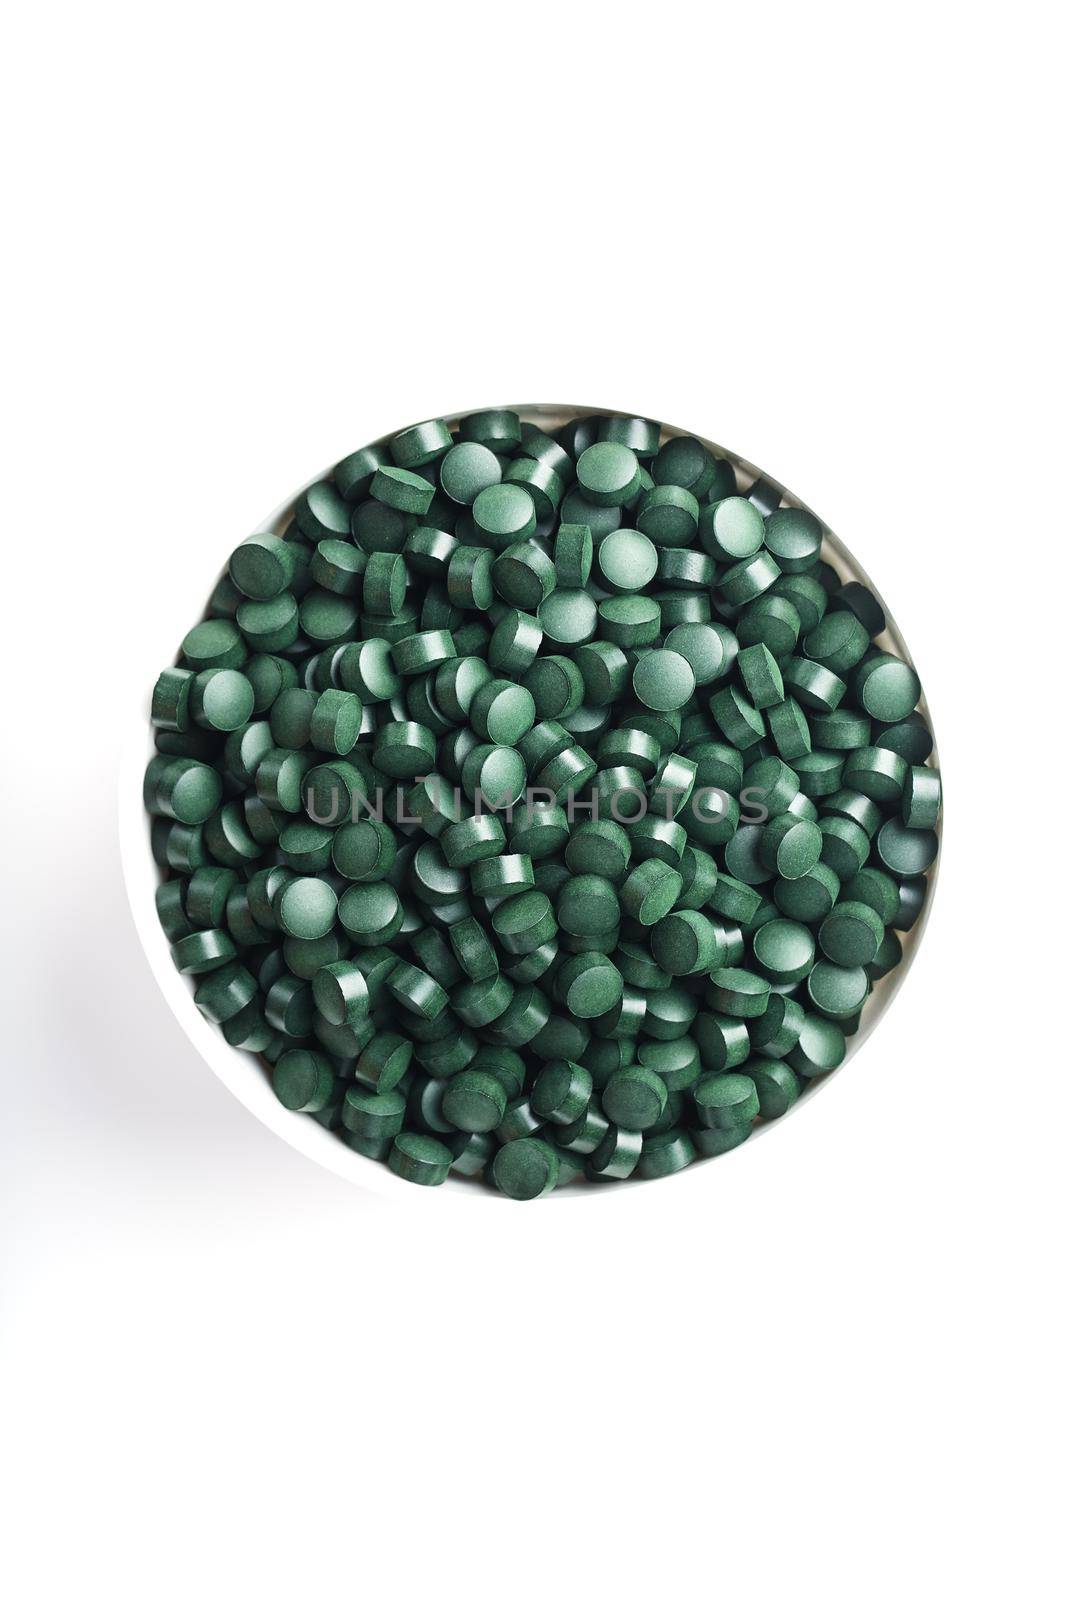 Spirulina tablets in a white cup on a white background by AlexGrec